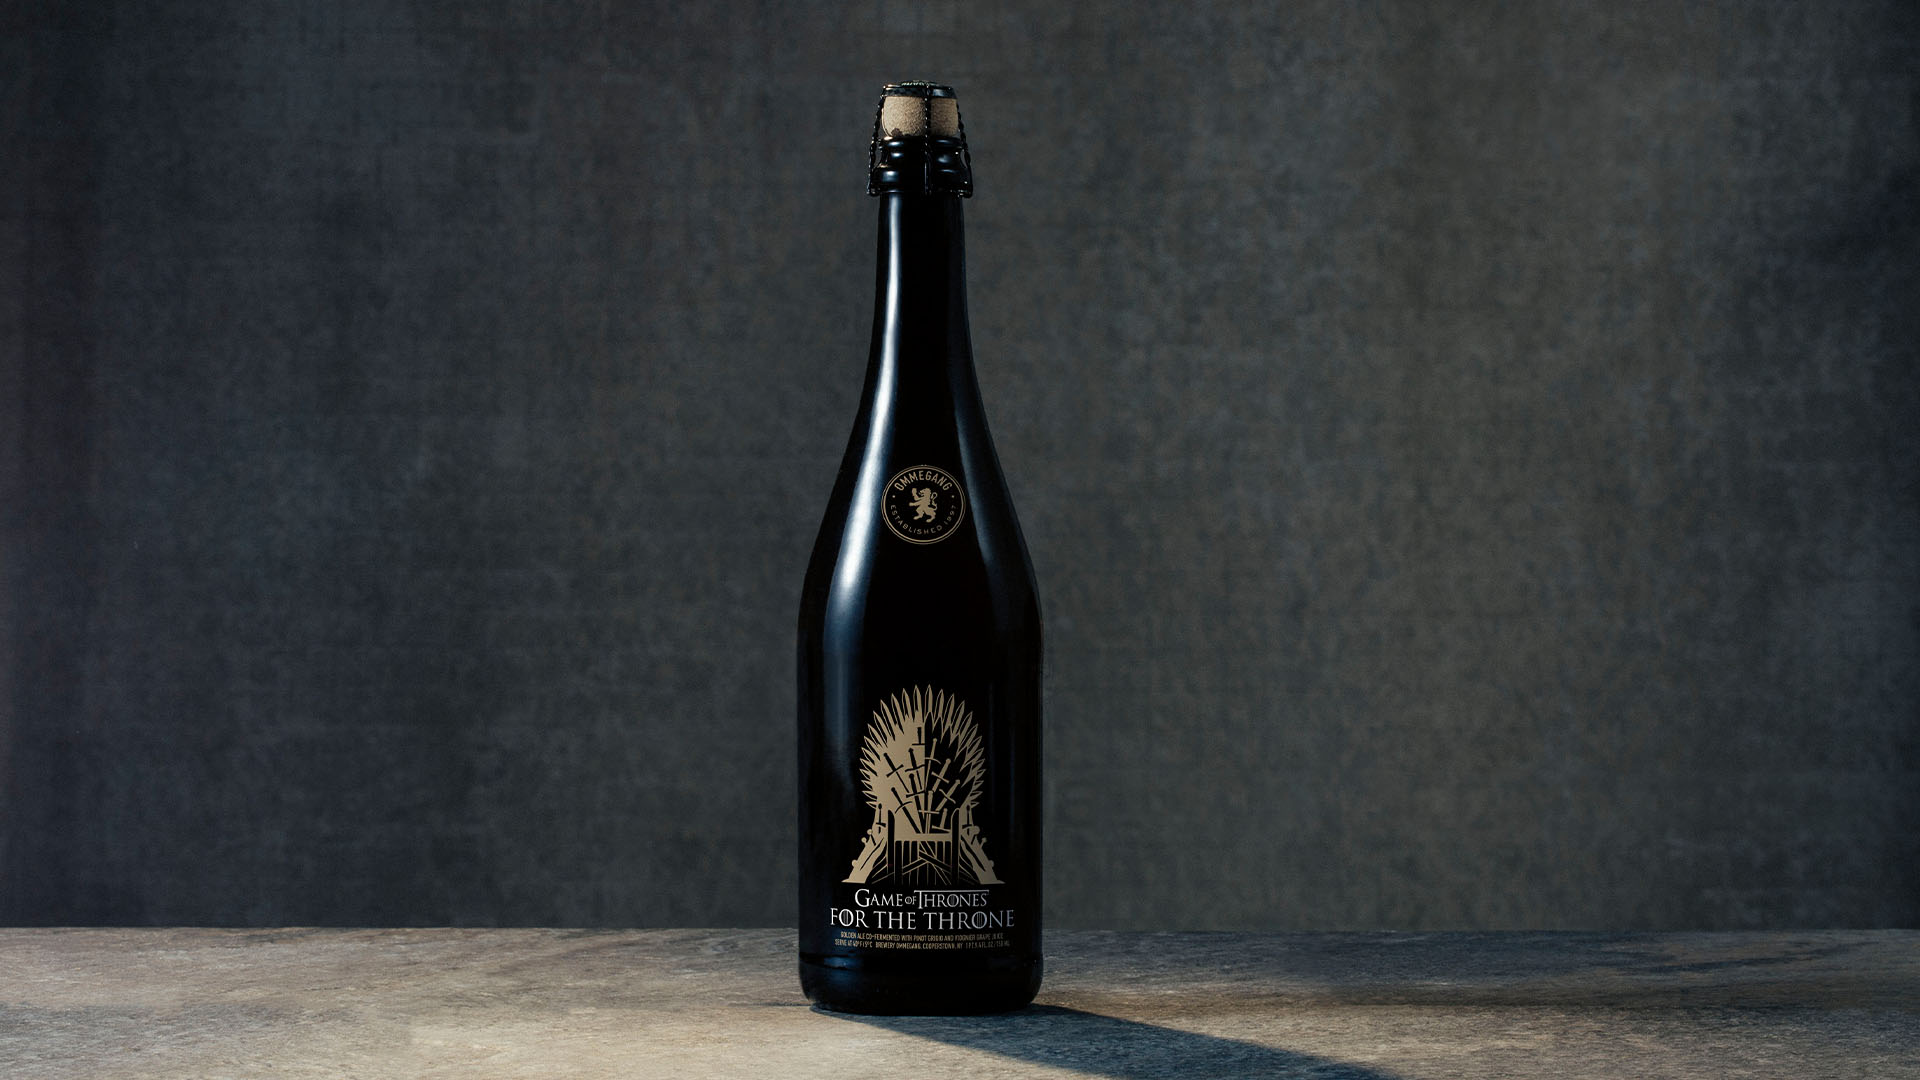 Brewery Ommegang and HBO® announce For The Throne, <br> New co-fermentation beer to celebrate the return of Game of Thrones®